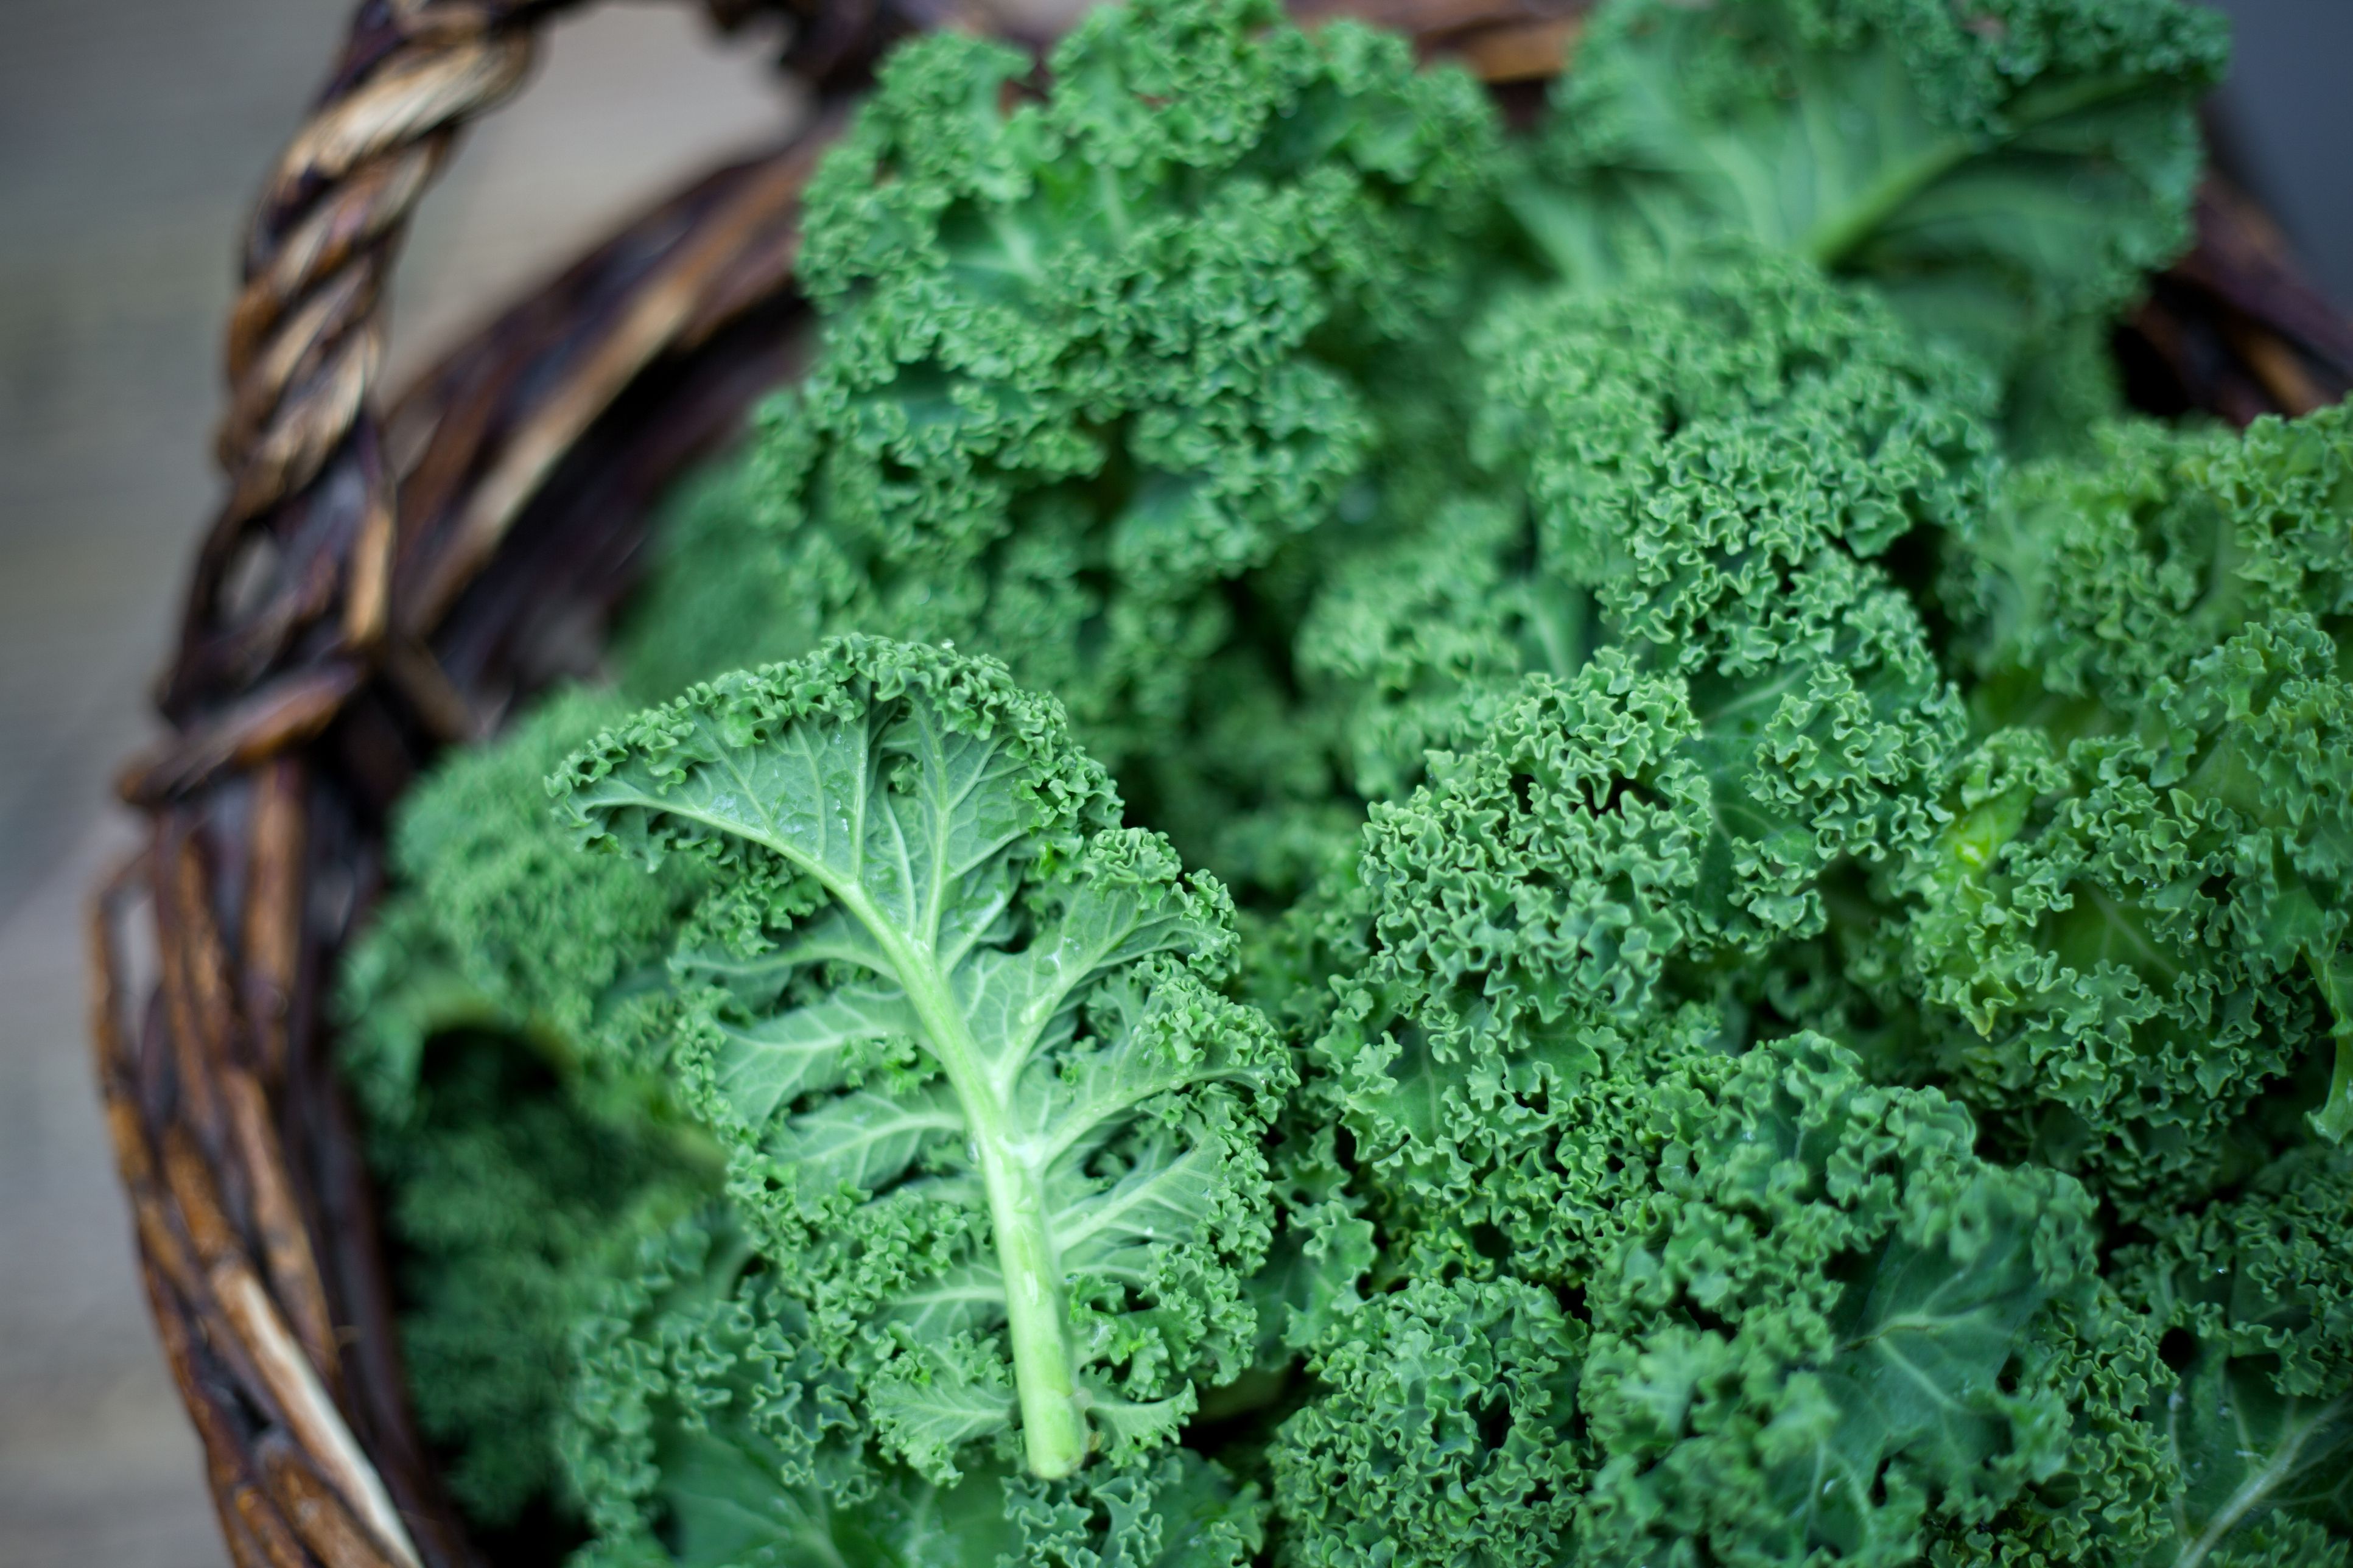 10 Tips for Growing Kale - How to Harvest Kale From a Garden or Pot